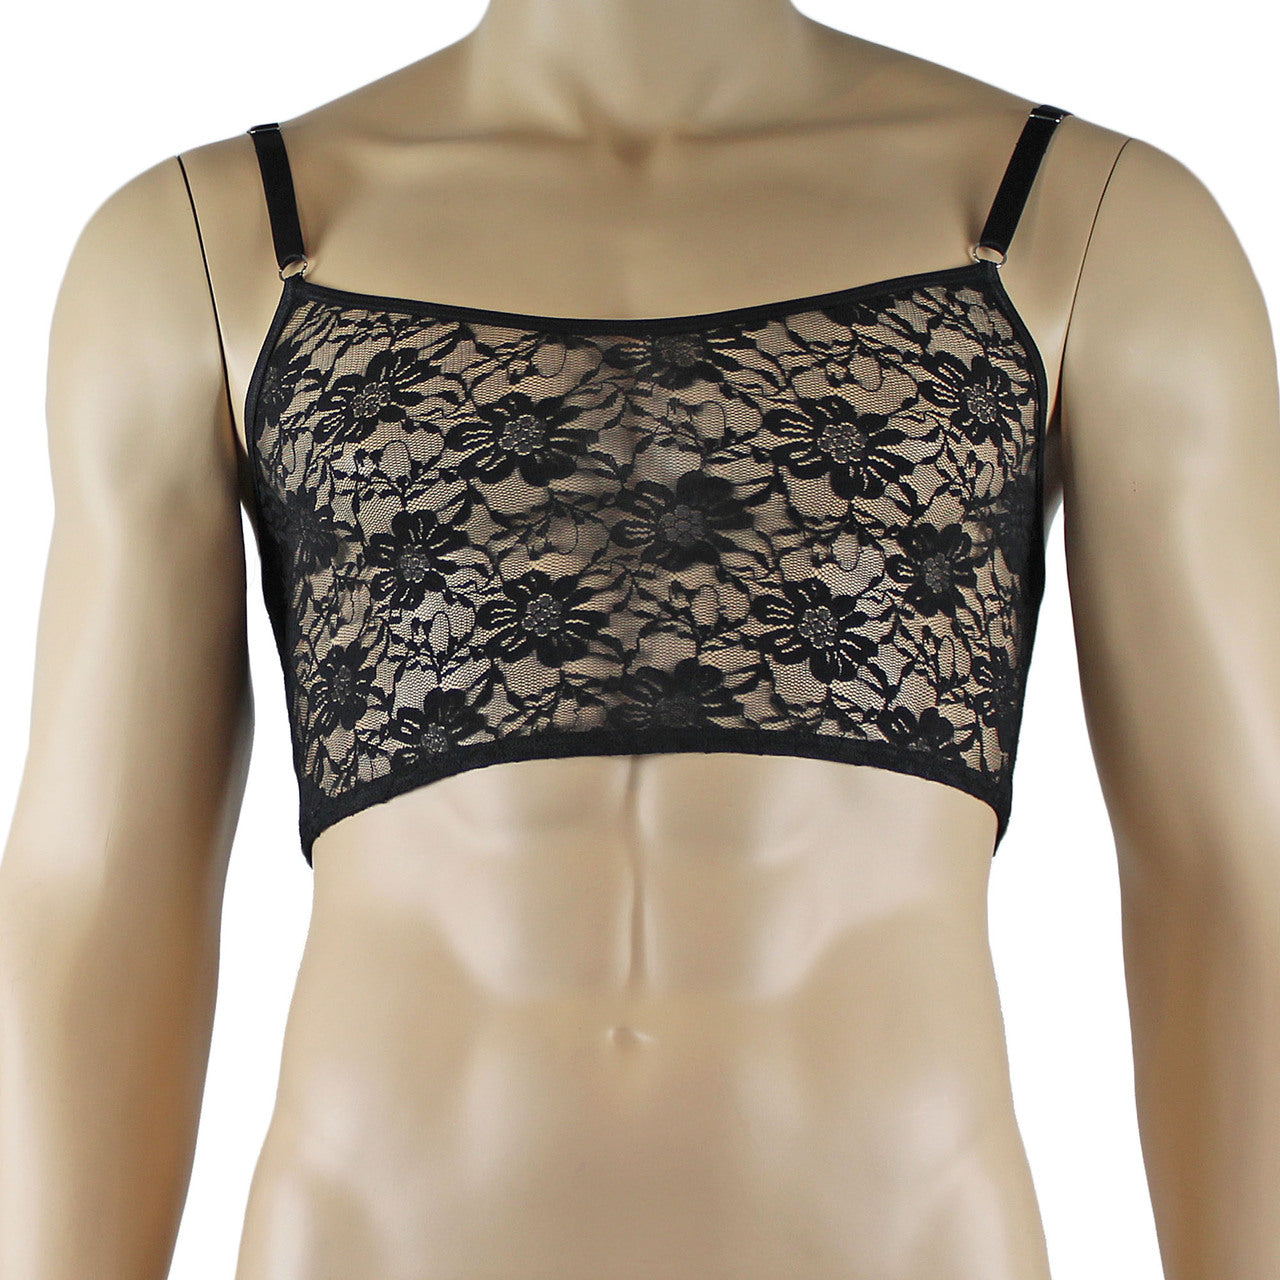 Mens Sexy Lace Crop Top Bra and Matching Lace Thong Black